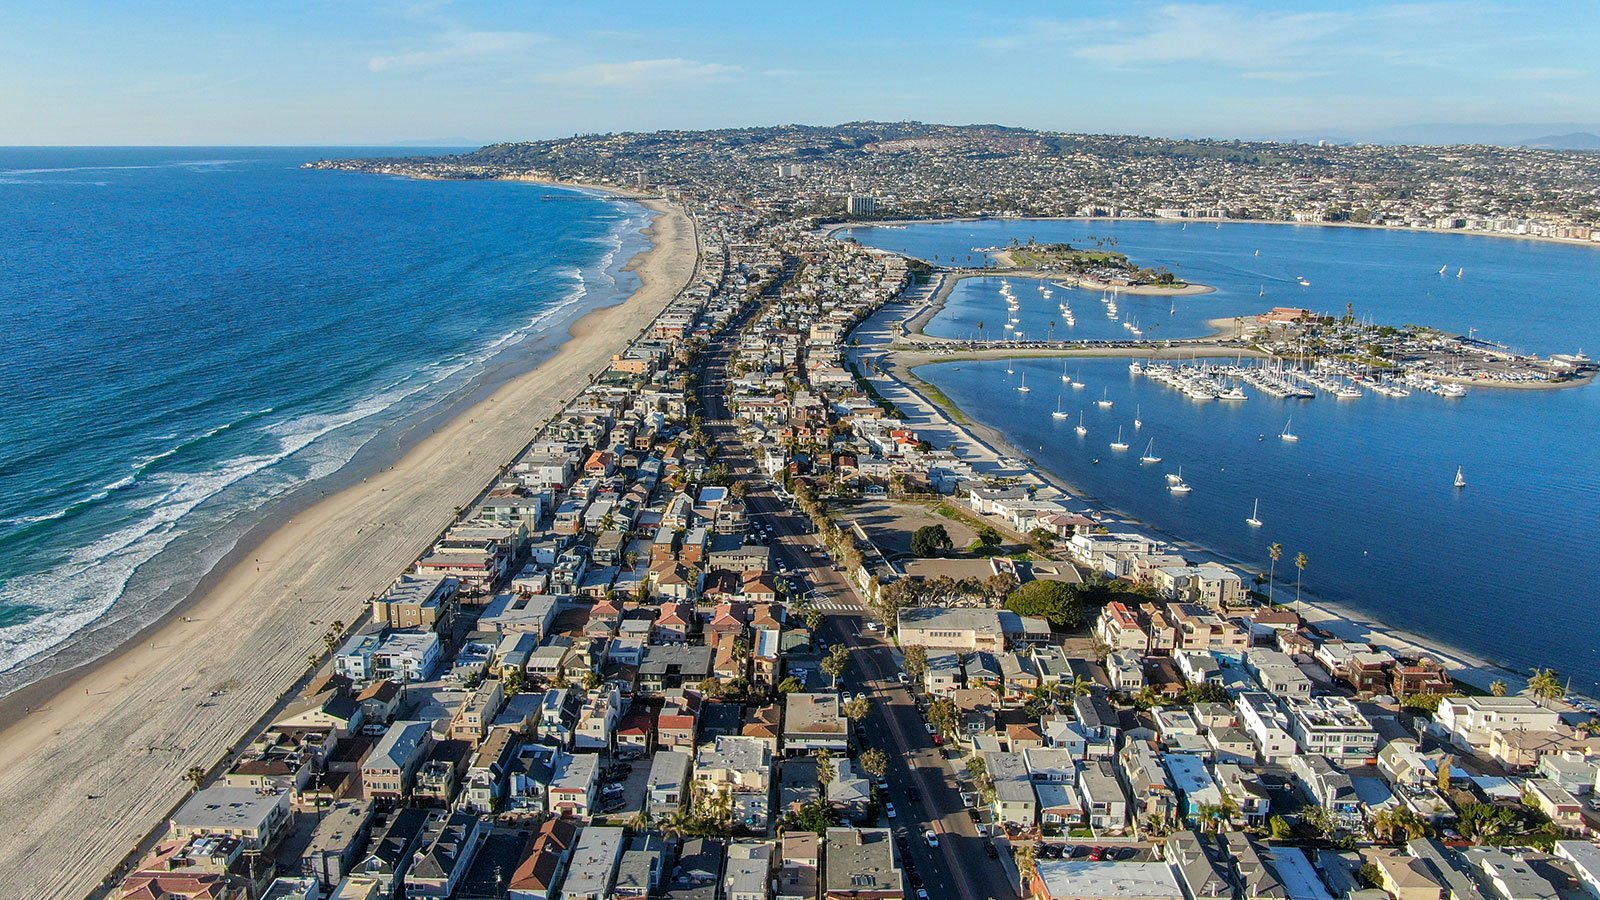 Aerial view of Mission Bay & Beaches in San Diego, California